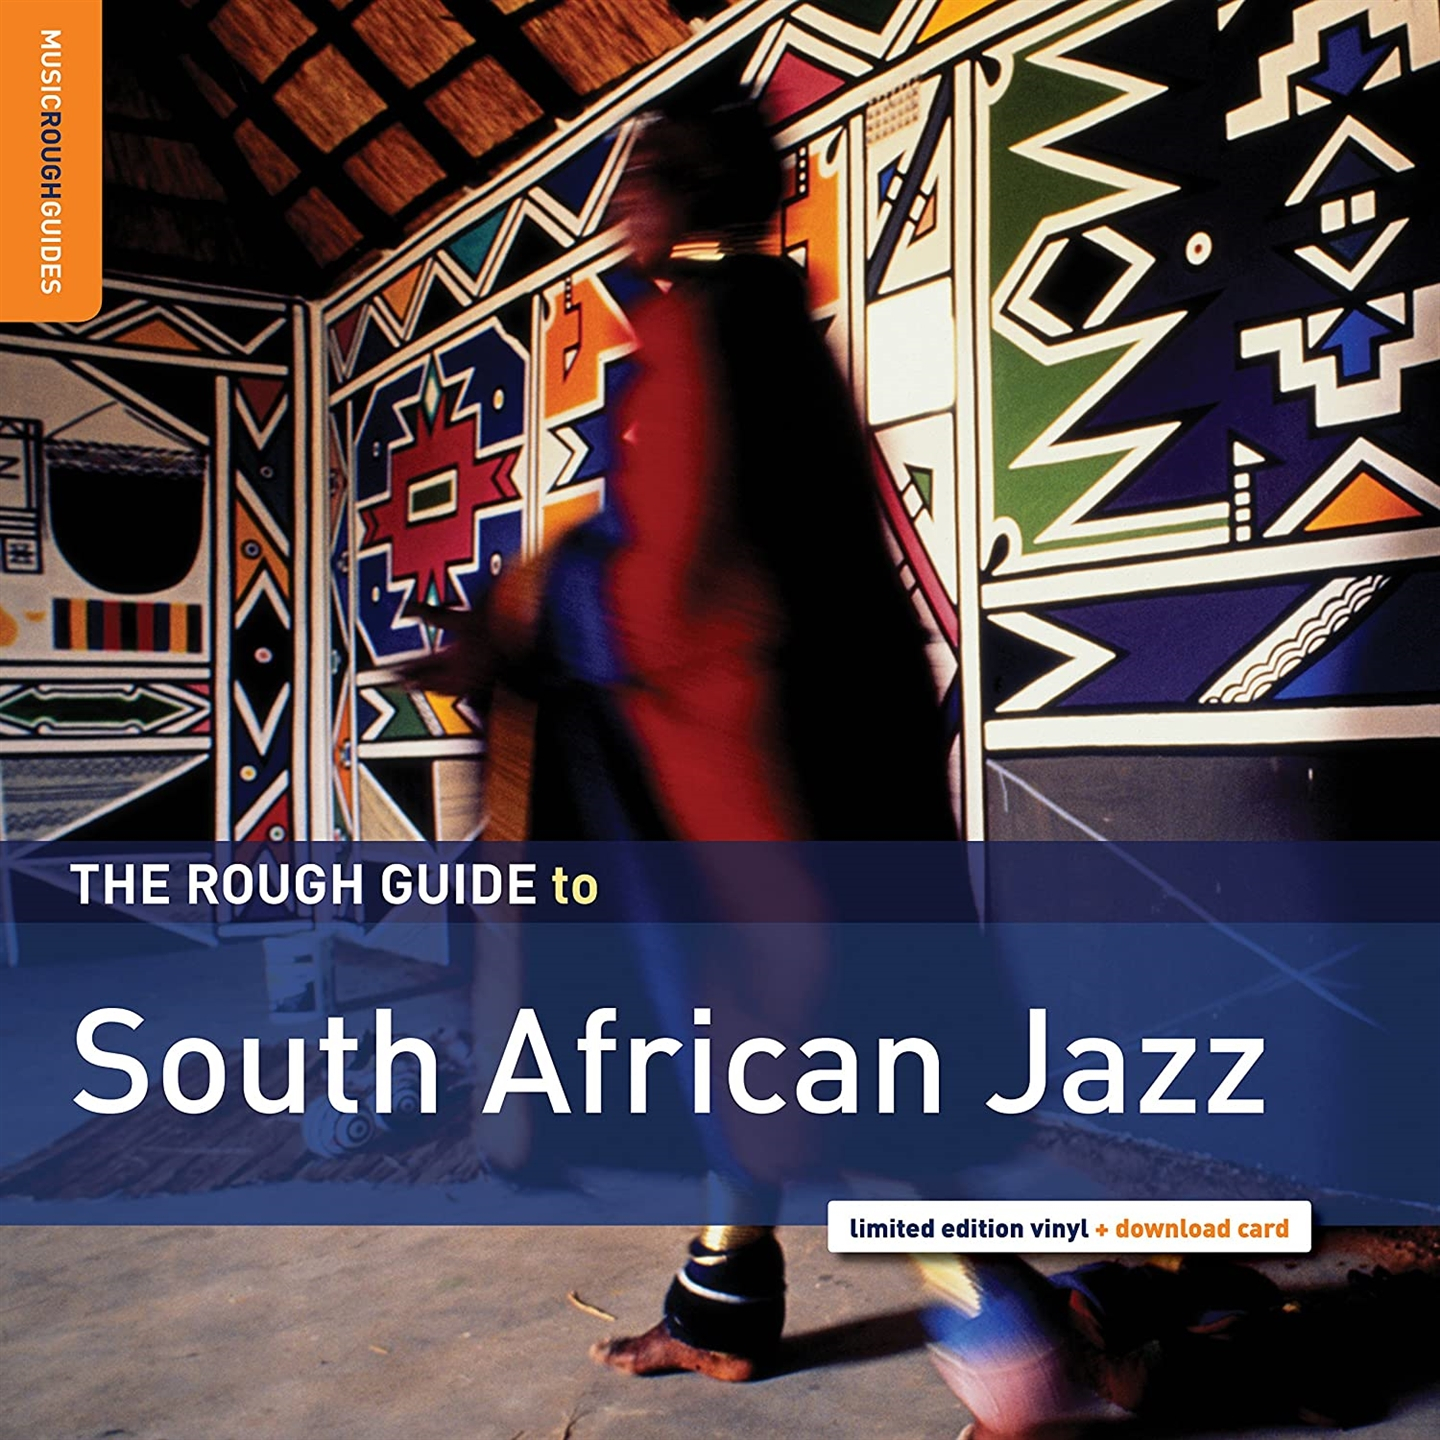 THE ROUGH GUIDE TO SOUTH AFRICAN JAZZ [LP]